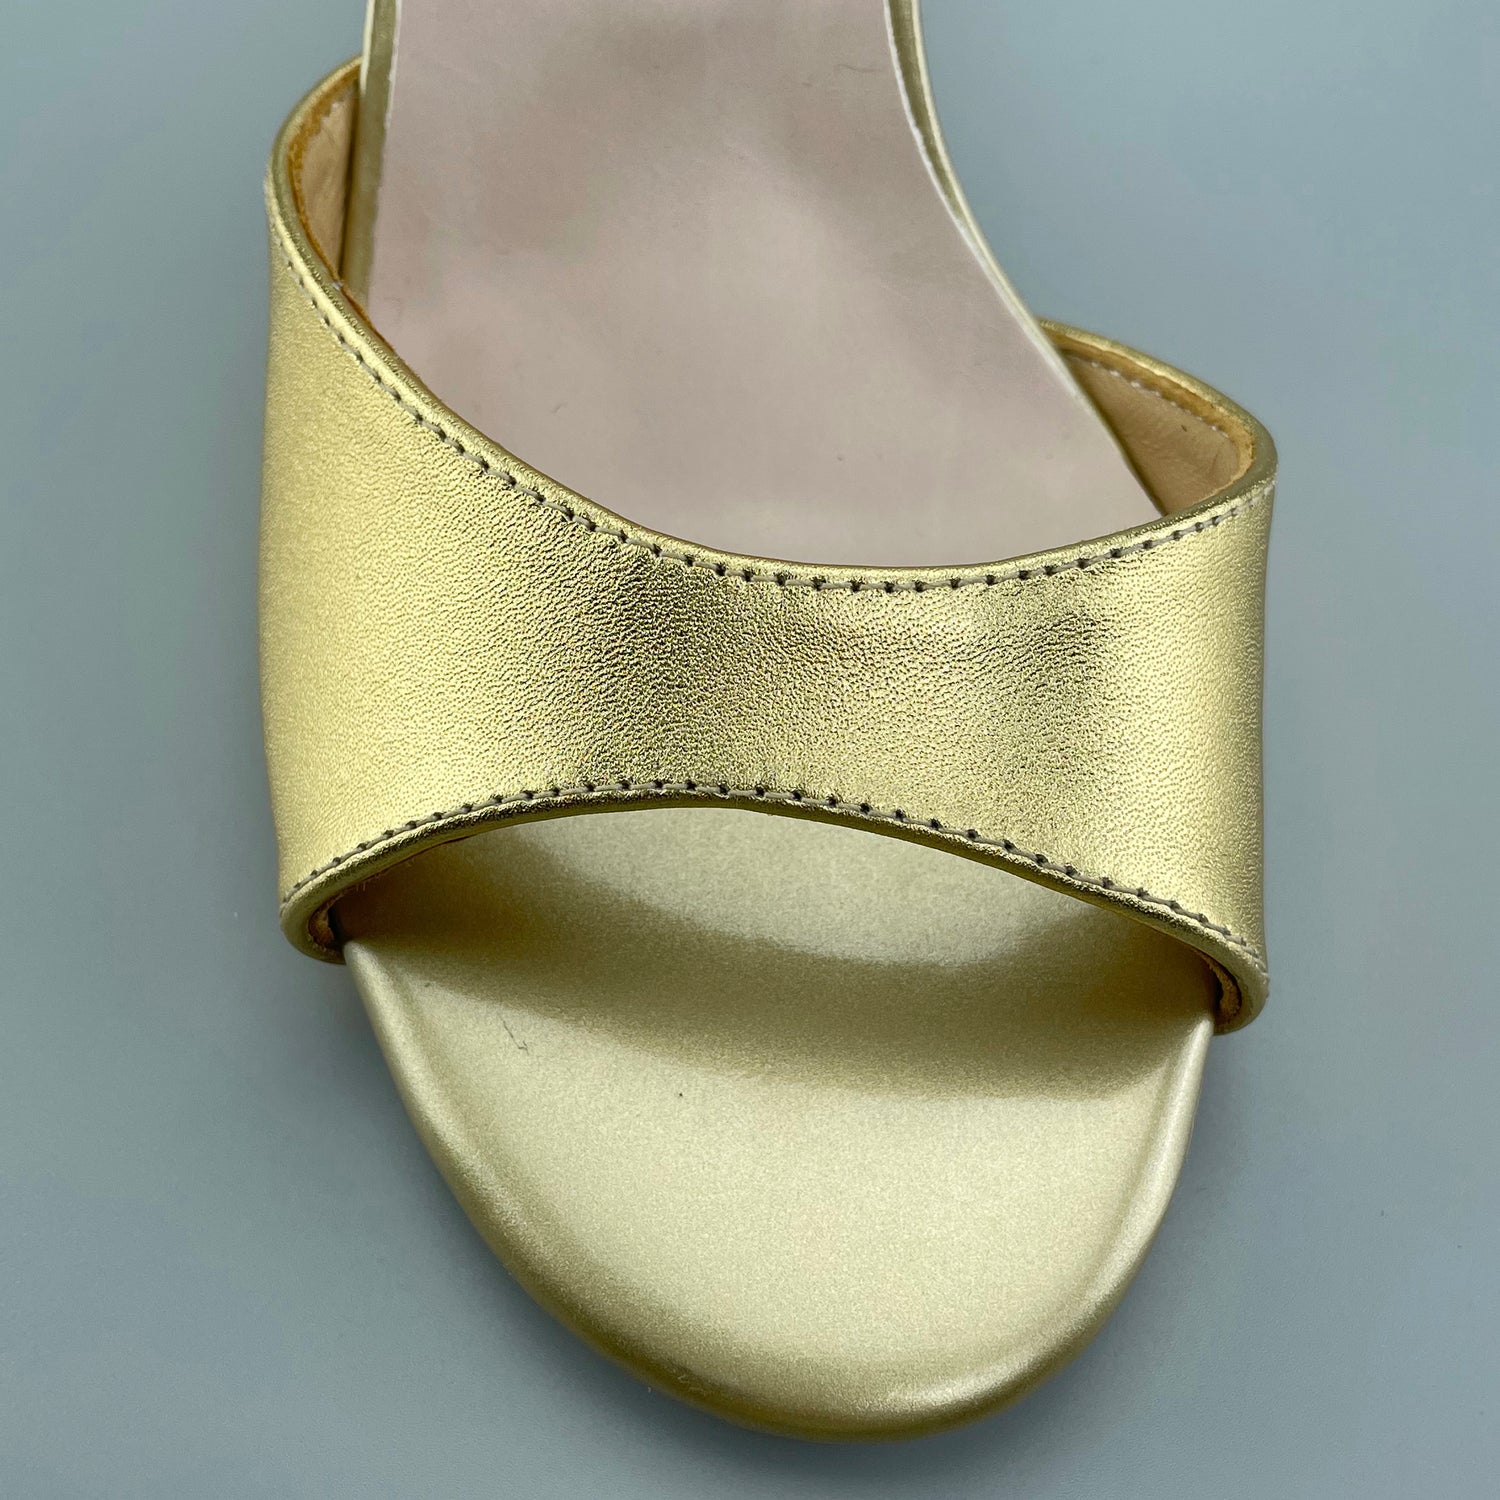 Gold Pro Dancer Tango Shoes open-toe high heels with hard leather sole1